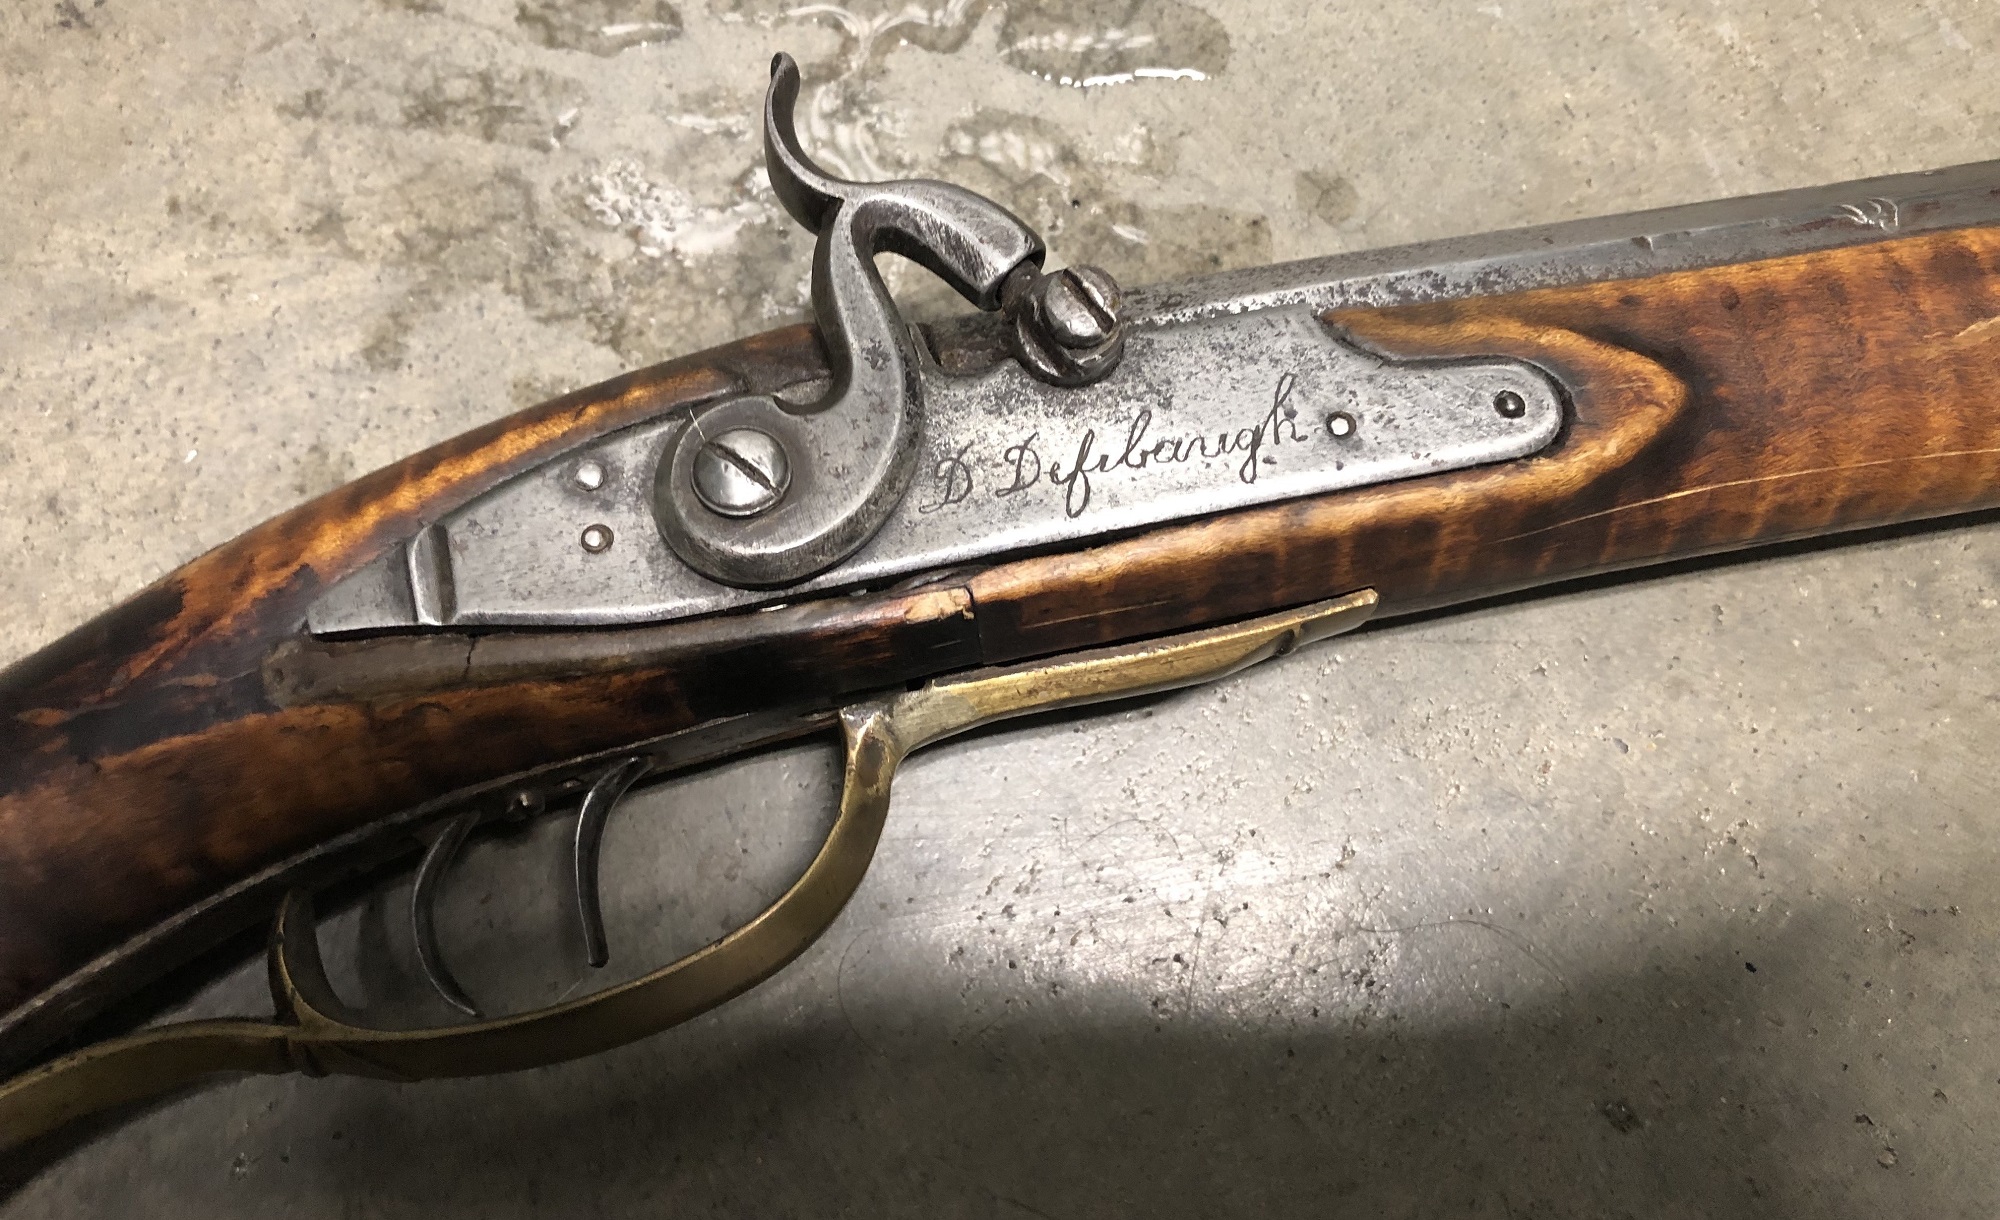 The signed percussion lock of the Defibaugh muzzleloading rifle.